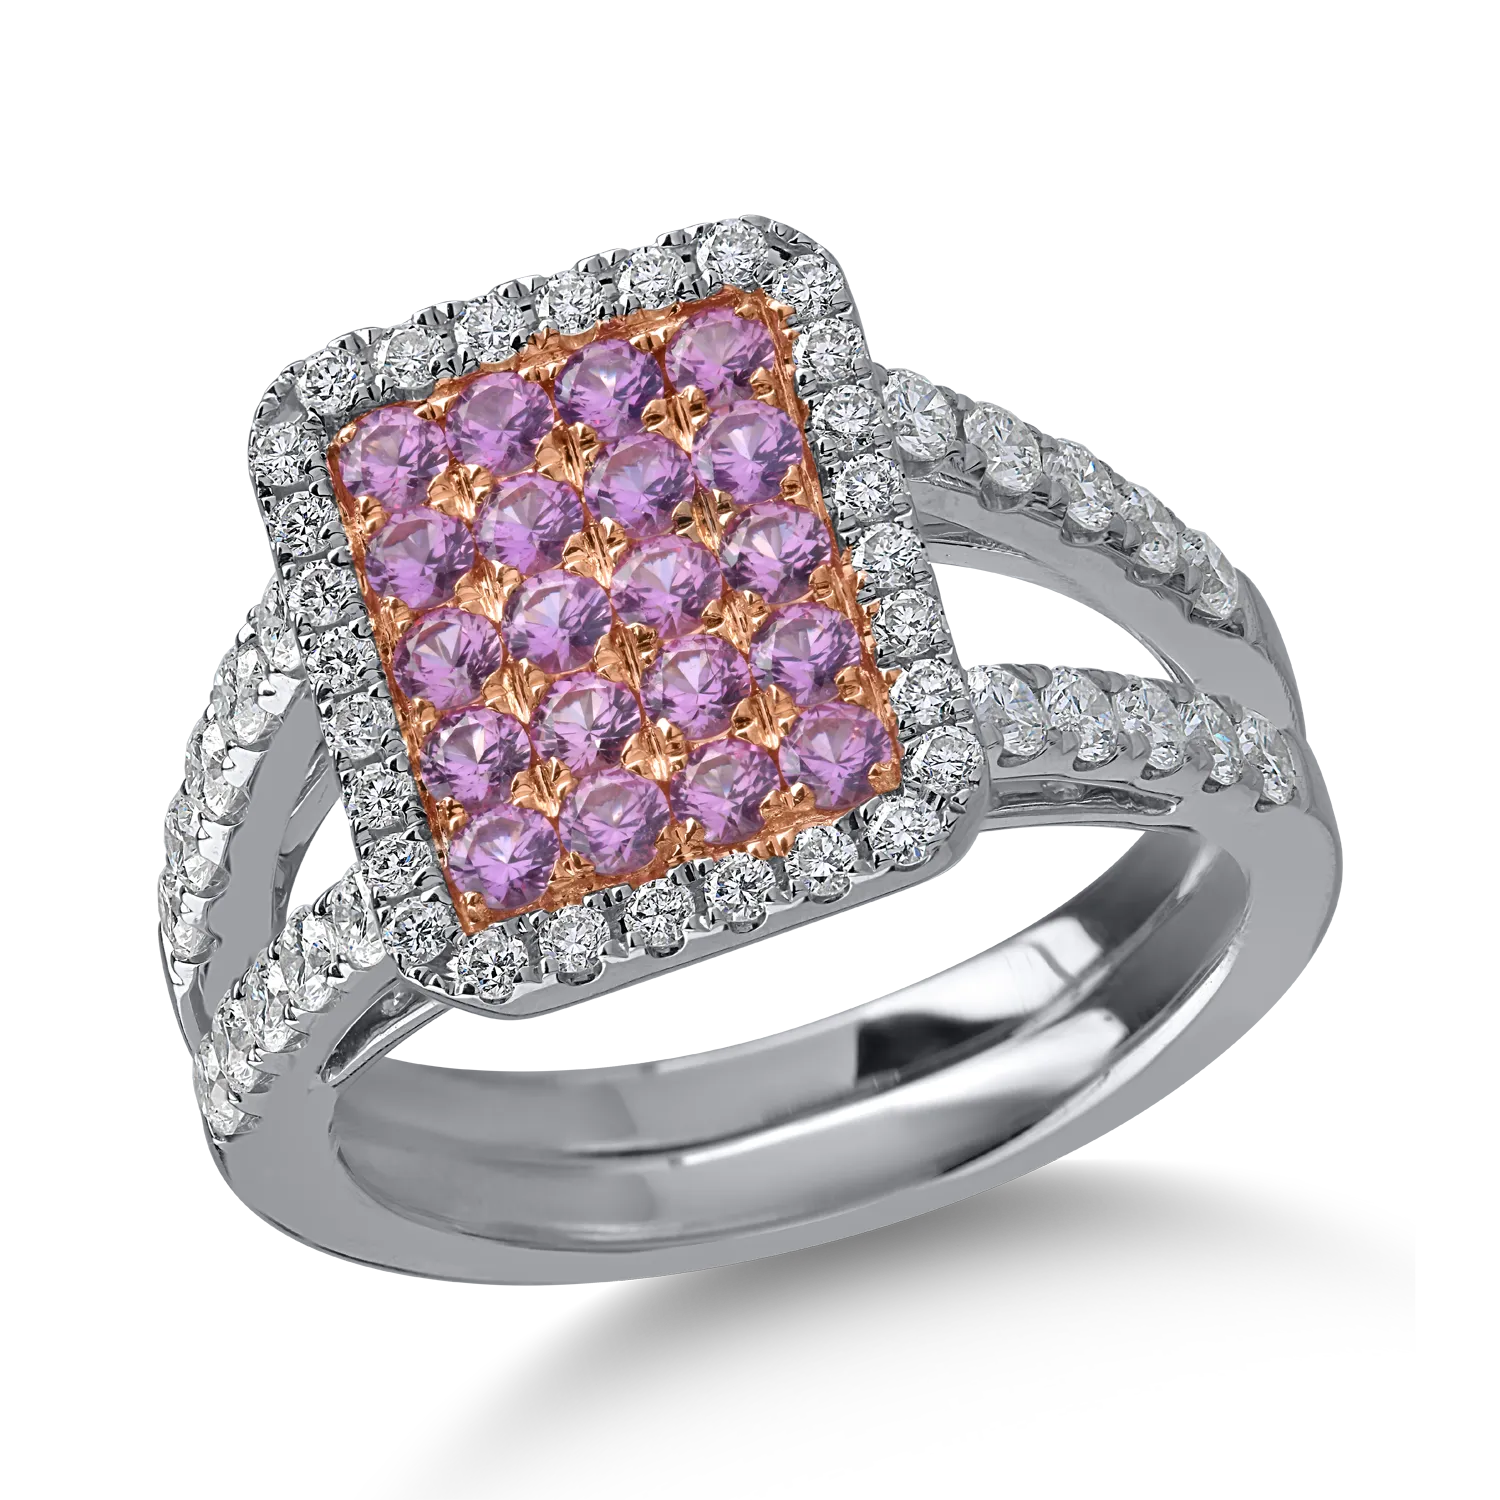 White-rose gold ring with 0.69ct pink sapphires and 0.72ct diamonds